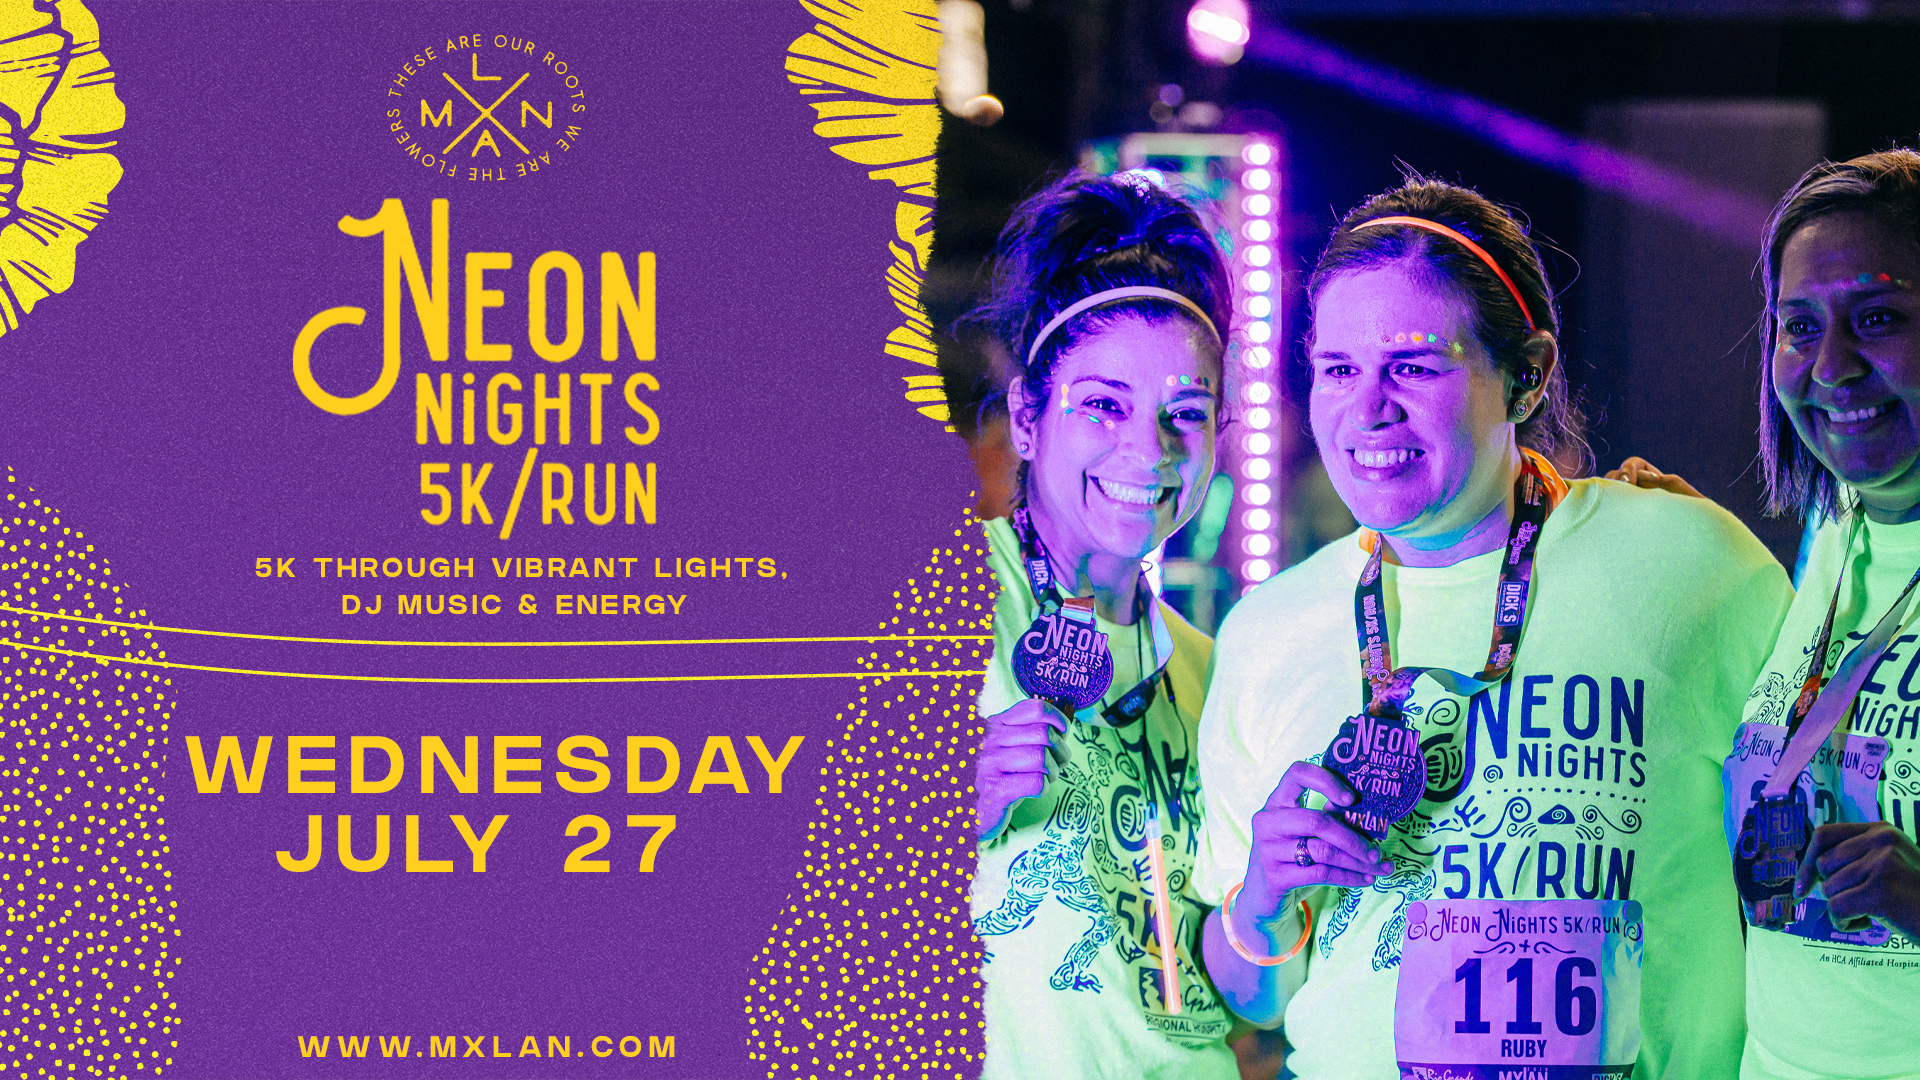 mxlan neon nights 5k festival mcallen latino latinx music arts best fesitval in texas acl south by south west coachella rio grande valley south padre island brownsville indie best latino festival in us breakthrough stage